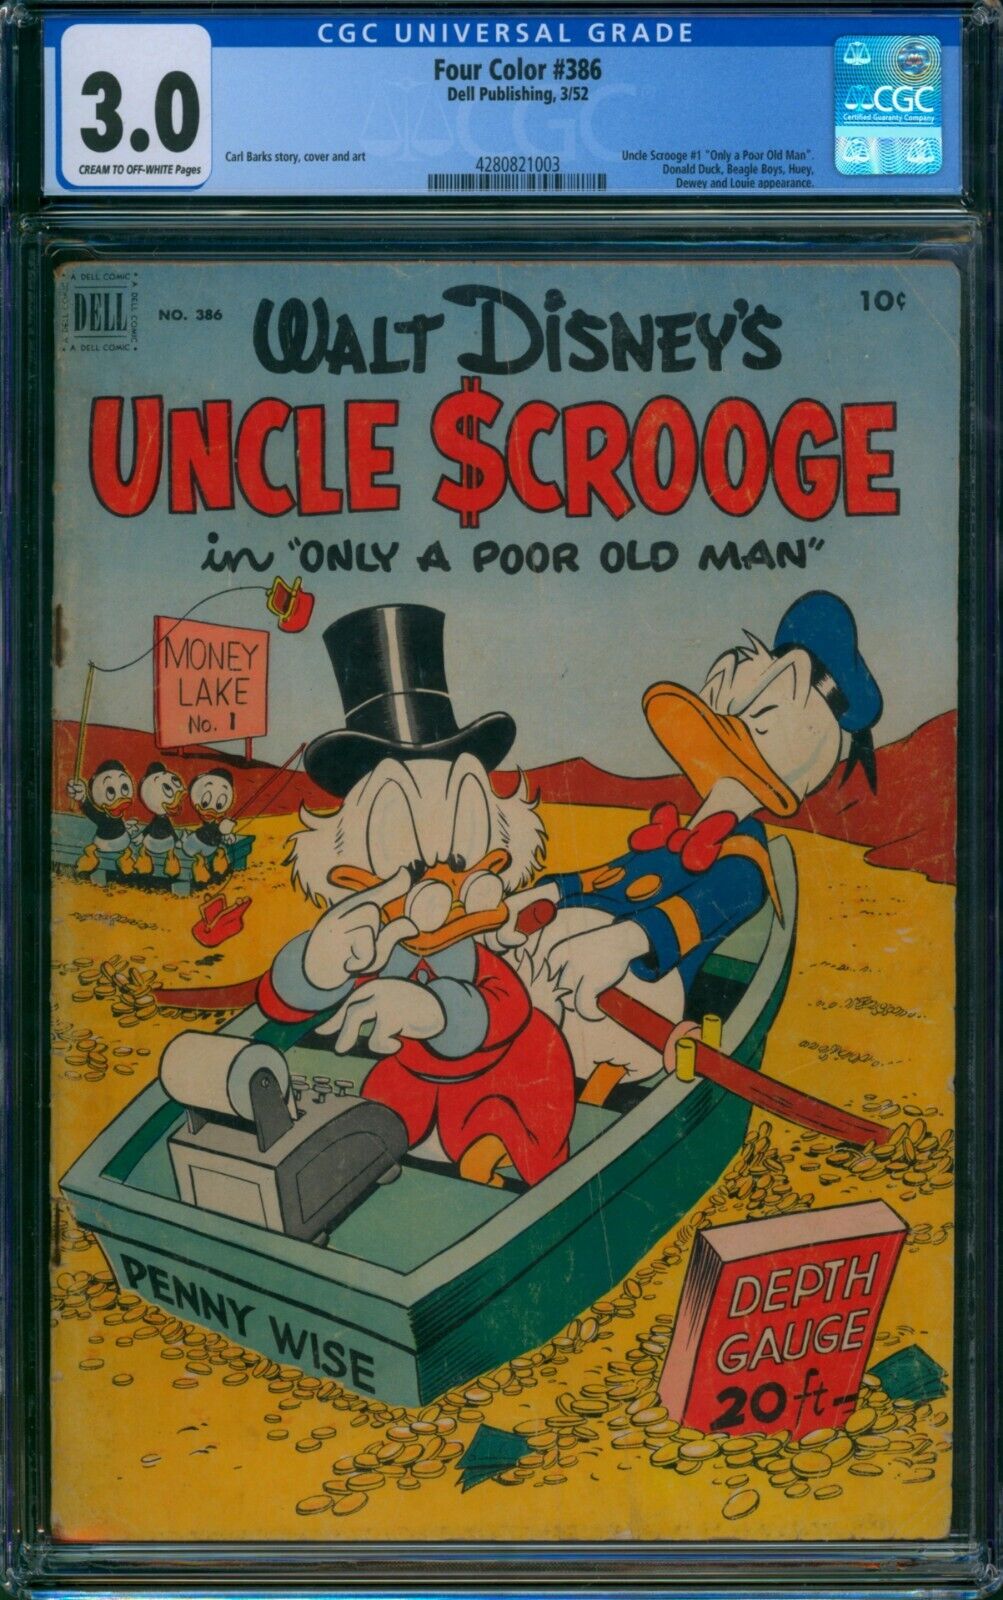 Four Color #386 ⭐ CGC 3.0 ⭐ Carl Barks Uncle Scrooge Golden Age Disney Dell 1952